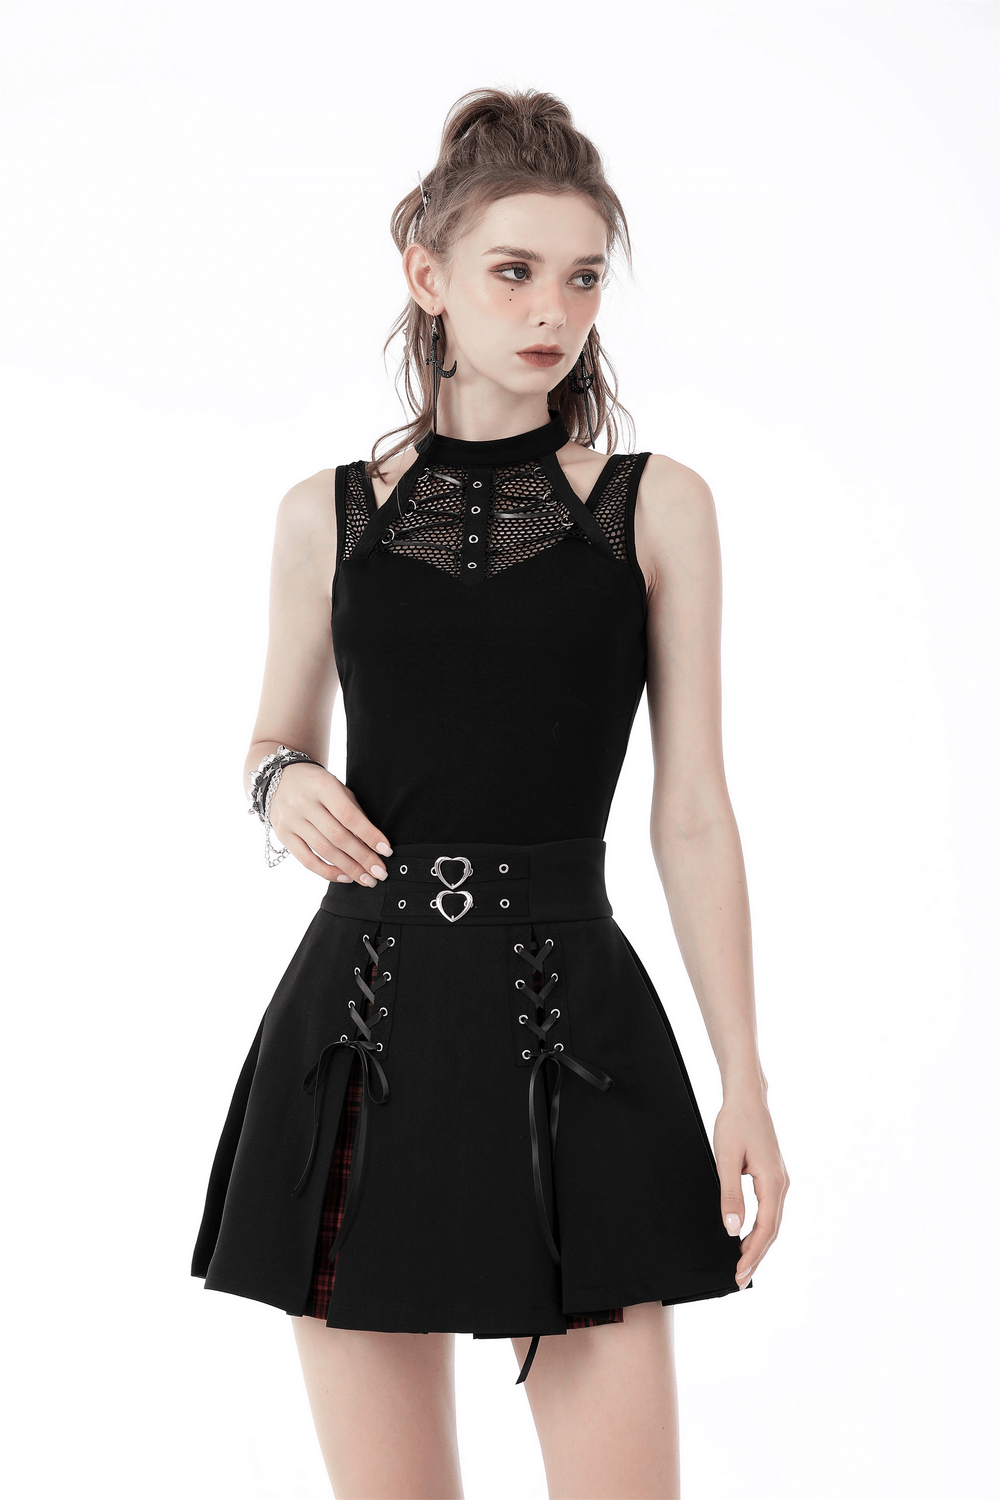 Punk Female Sleeveless Crop Top with Ribcage Mesh Detailing